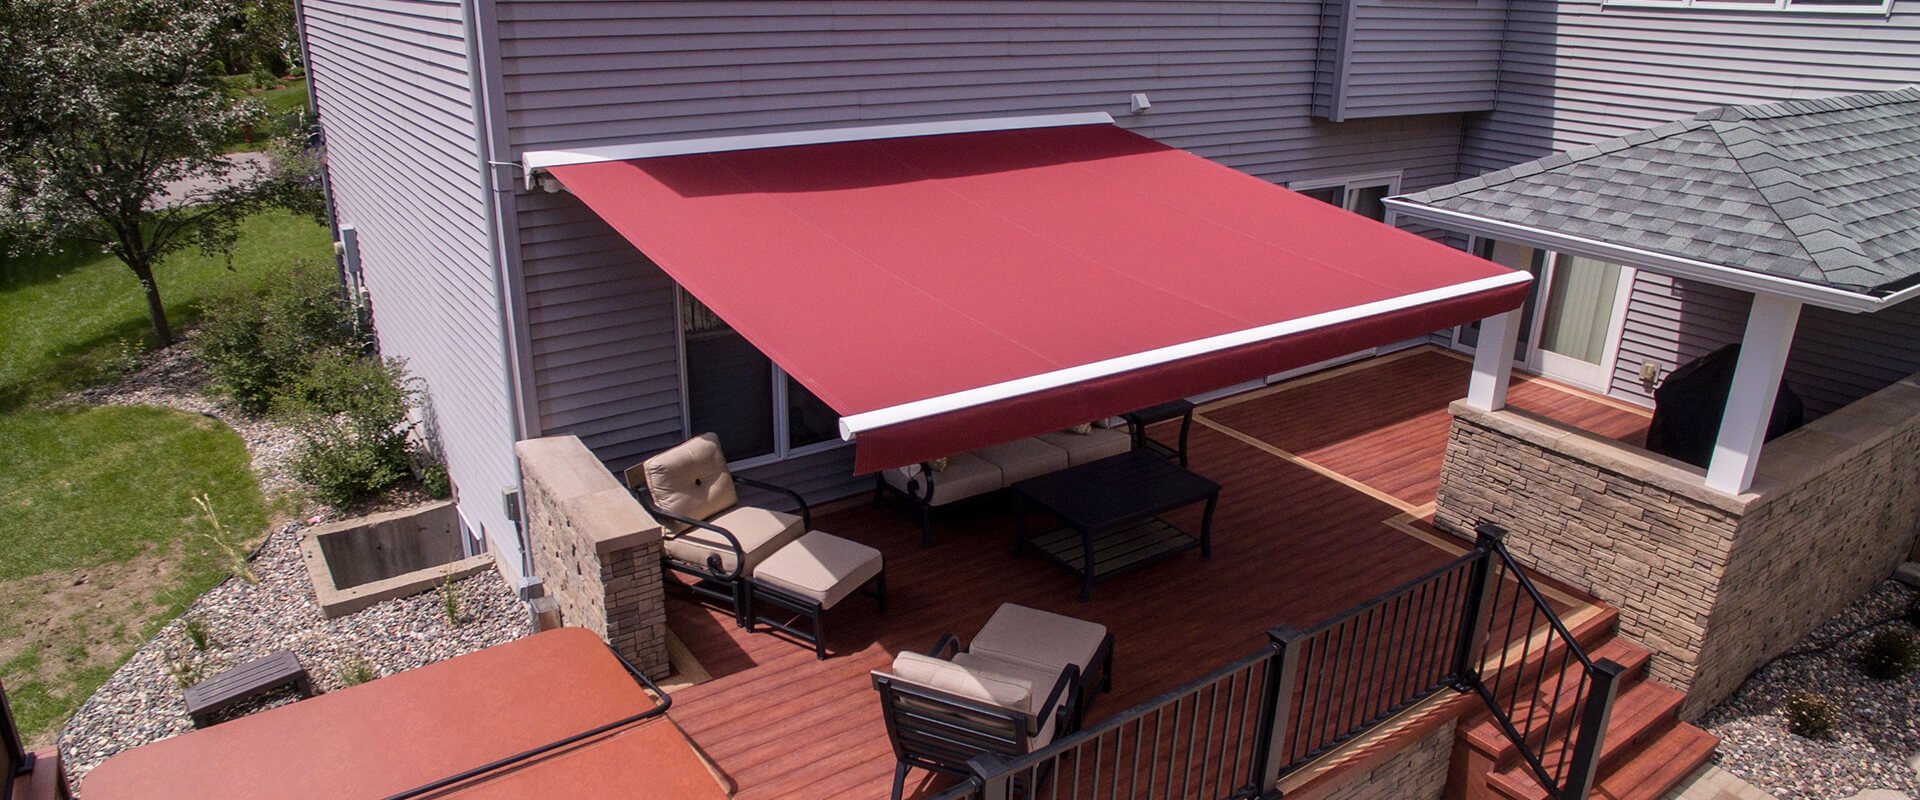 How Long Does It Take to Install a Retractable Awning?